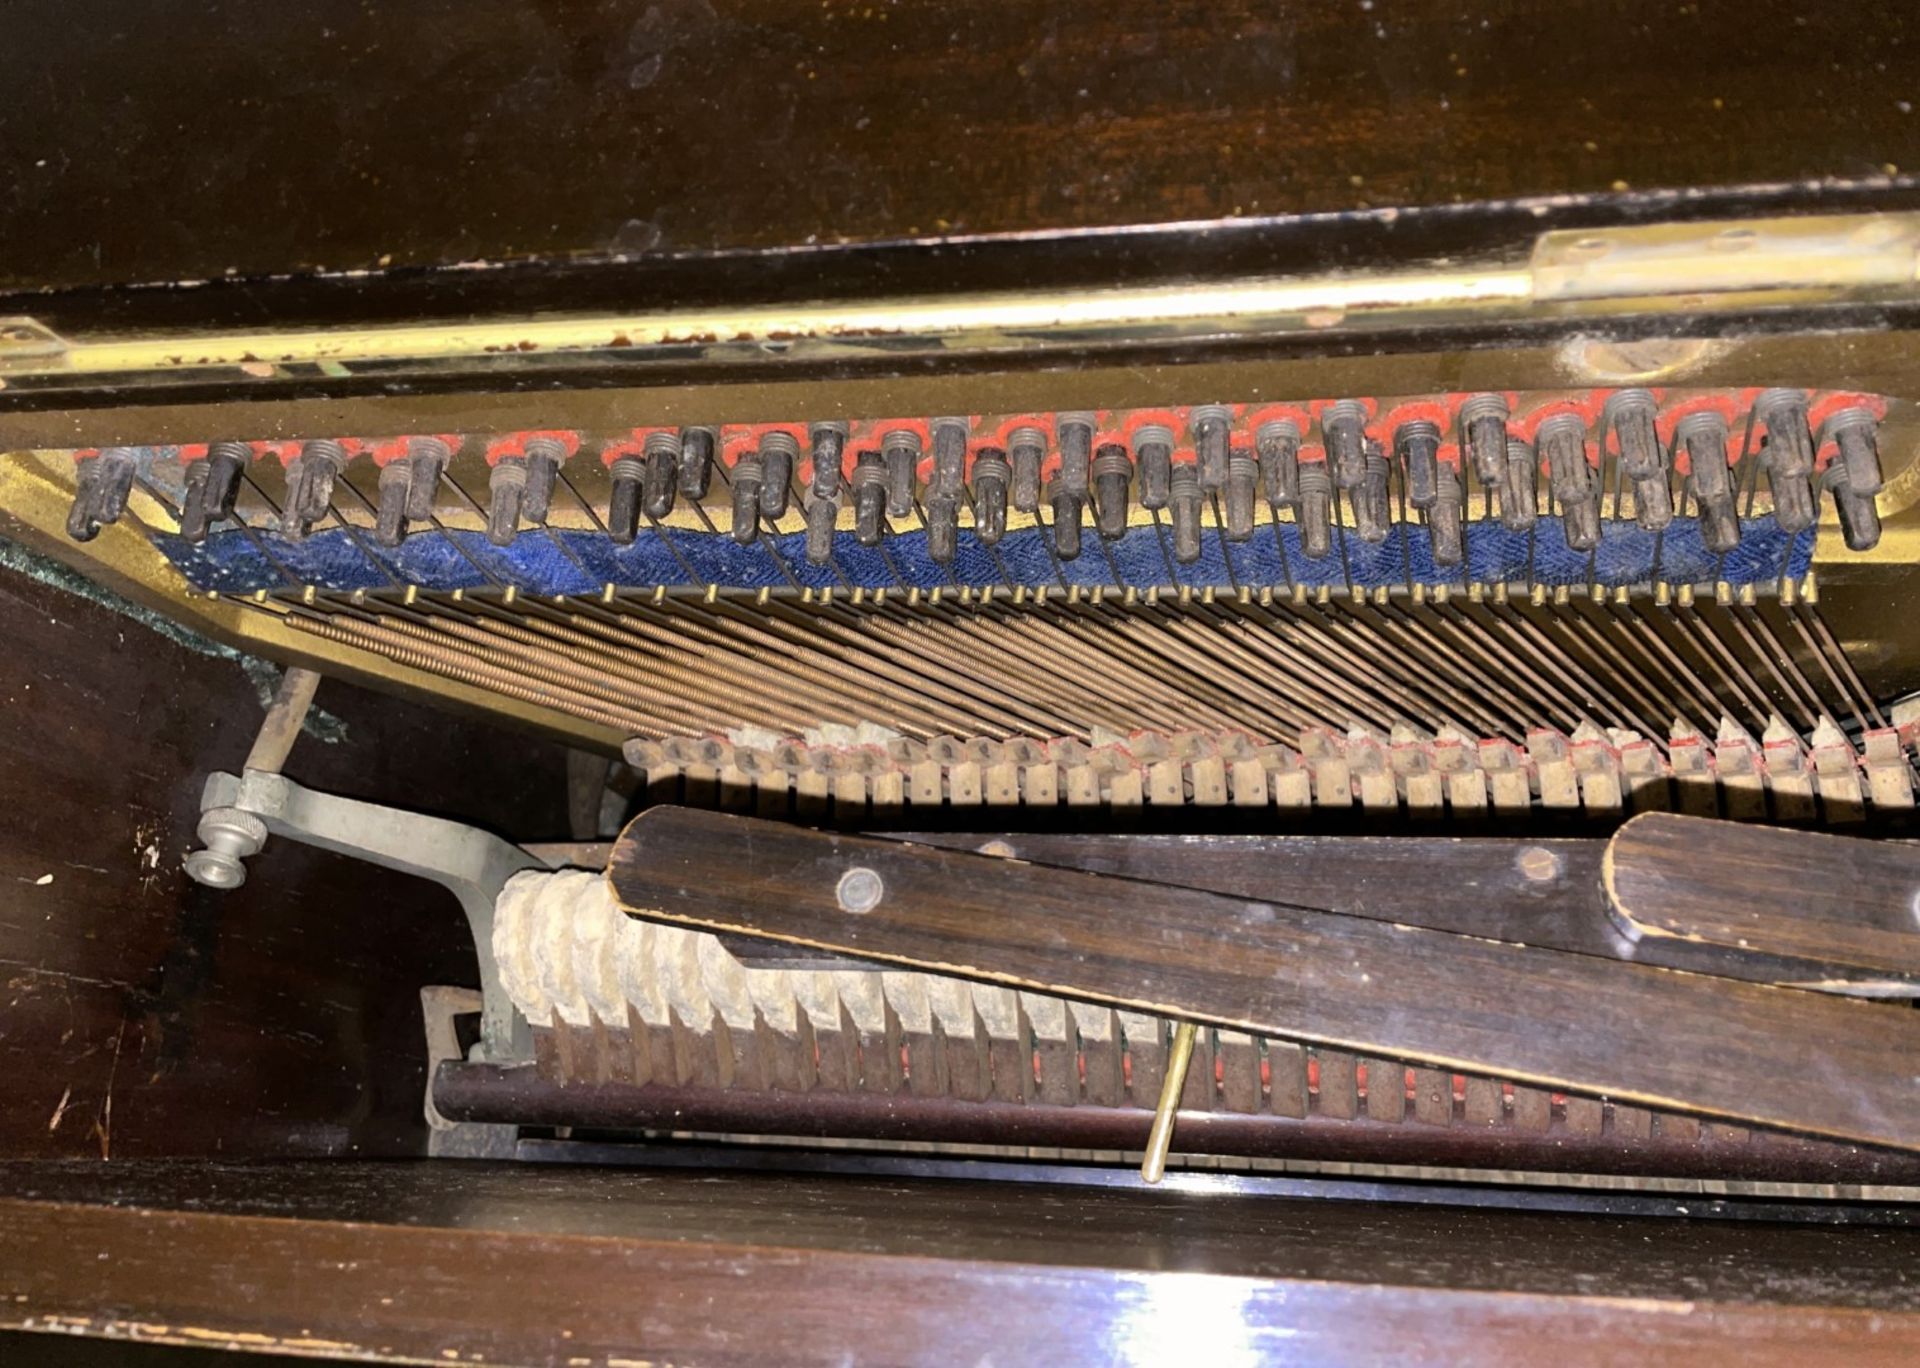 1 x Vintage EMILE AUBERON Mahogany Overstrung Upright Piano - Ref: 123 - CL909 - Location: London, - Image 11 of 13